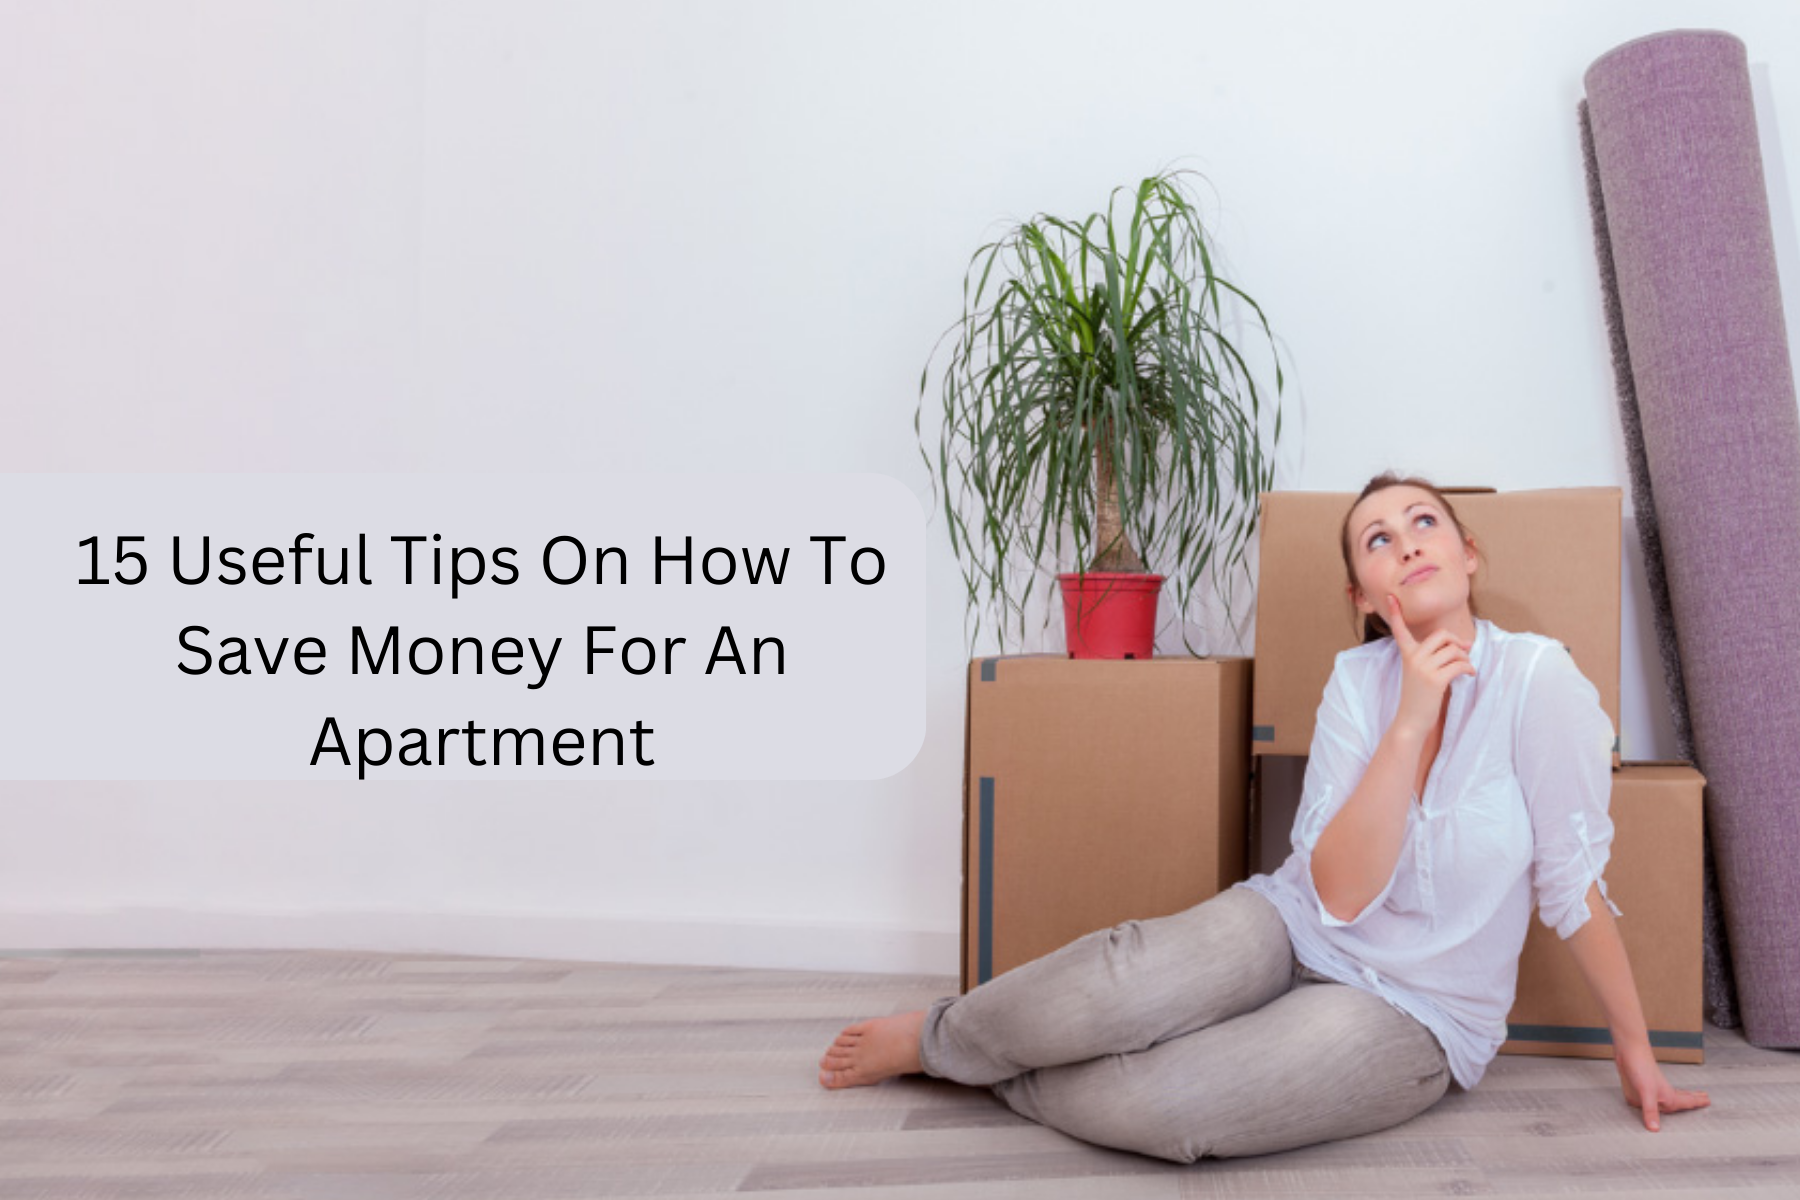 15 Useful Tips On How To Save Money For An Apartment